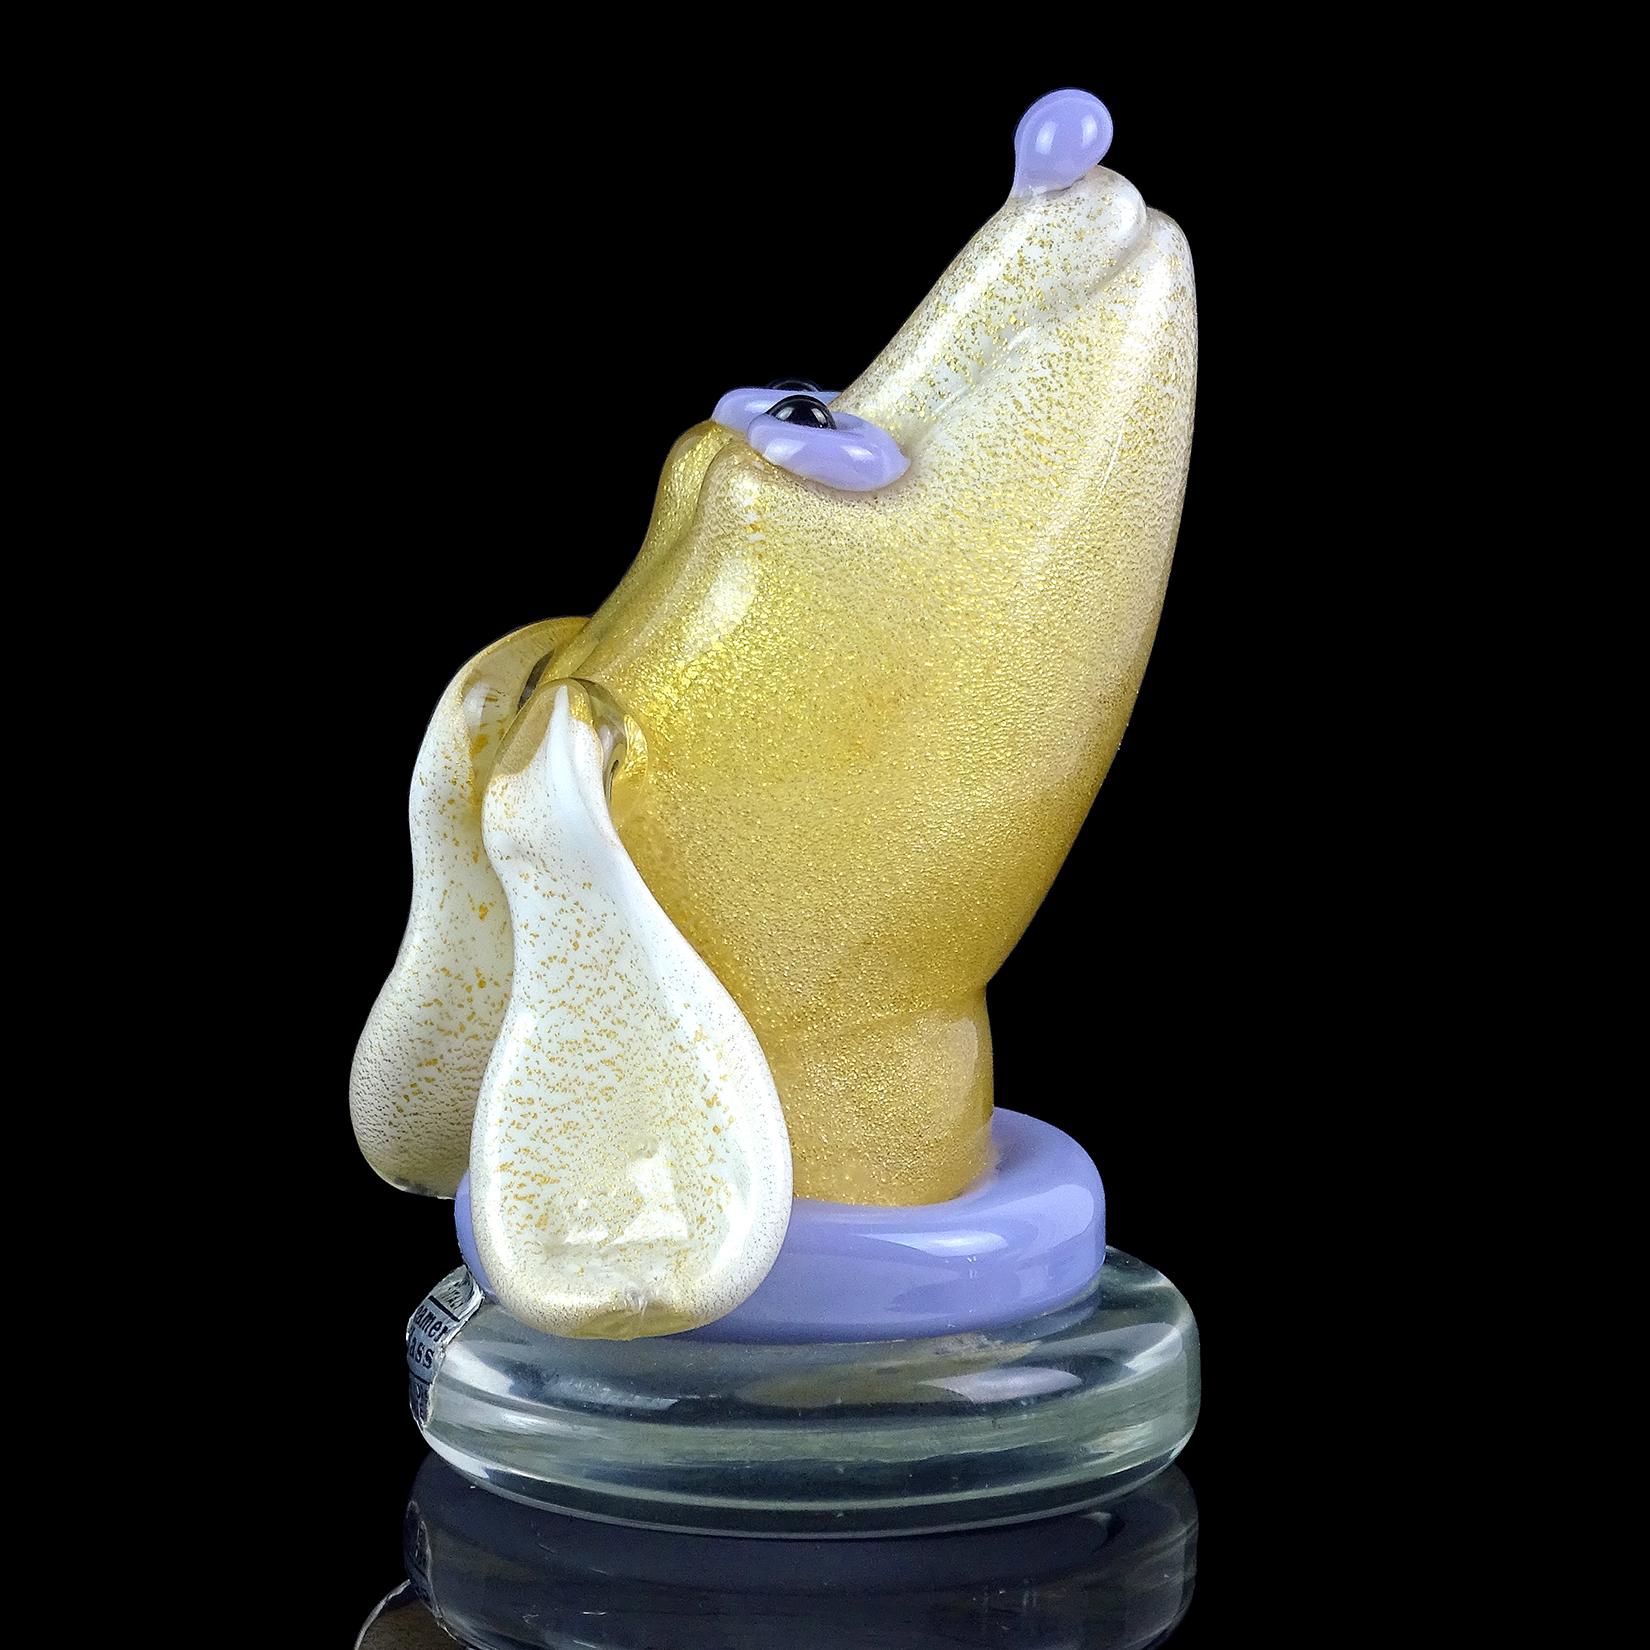 Beautiful and rare, vintage Murano hand blown white, gold flecks and purple accents Italian art glass puppy dog sculpture or paperweight. Documented to designer Alfredo Barbini, circa 1950s. Profusely covered in gold leaf, with clear base. Would